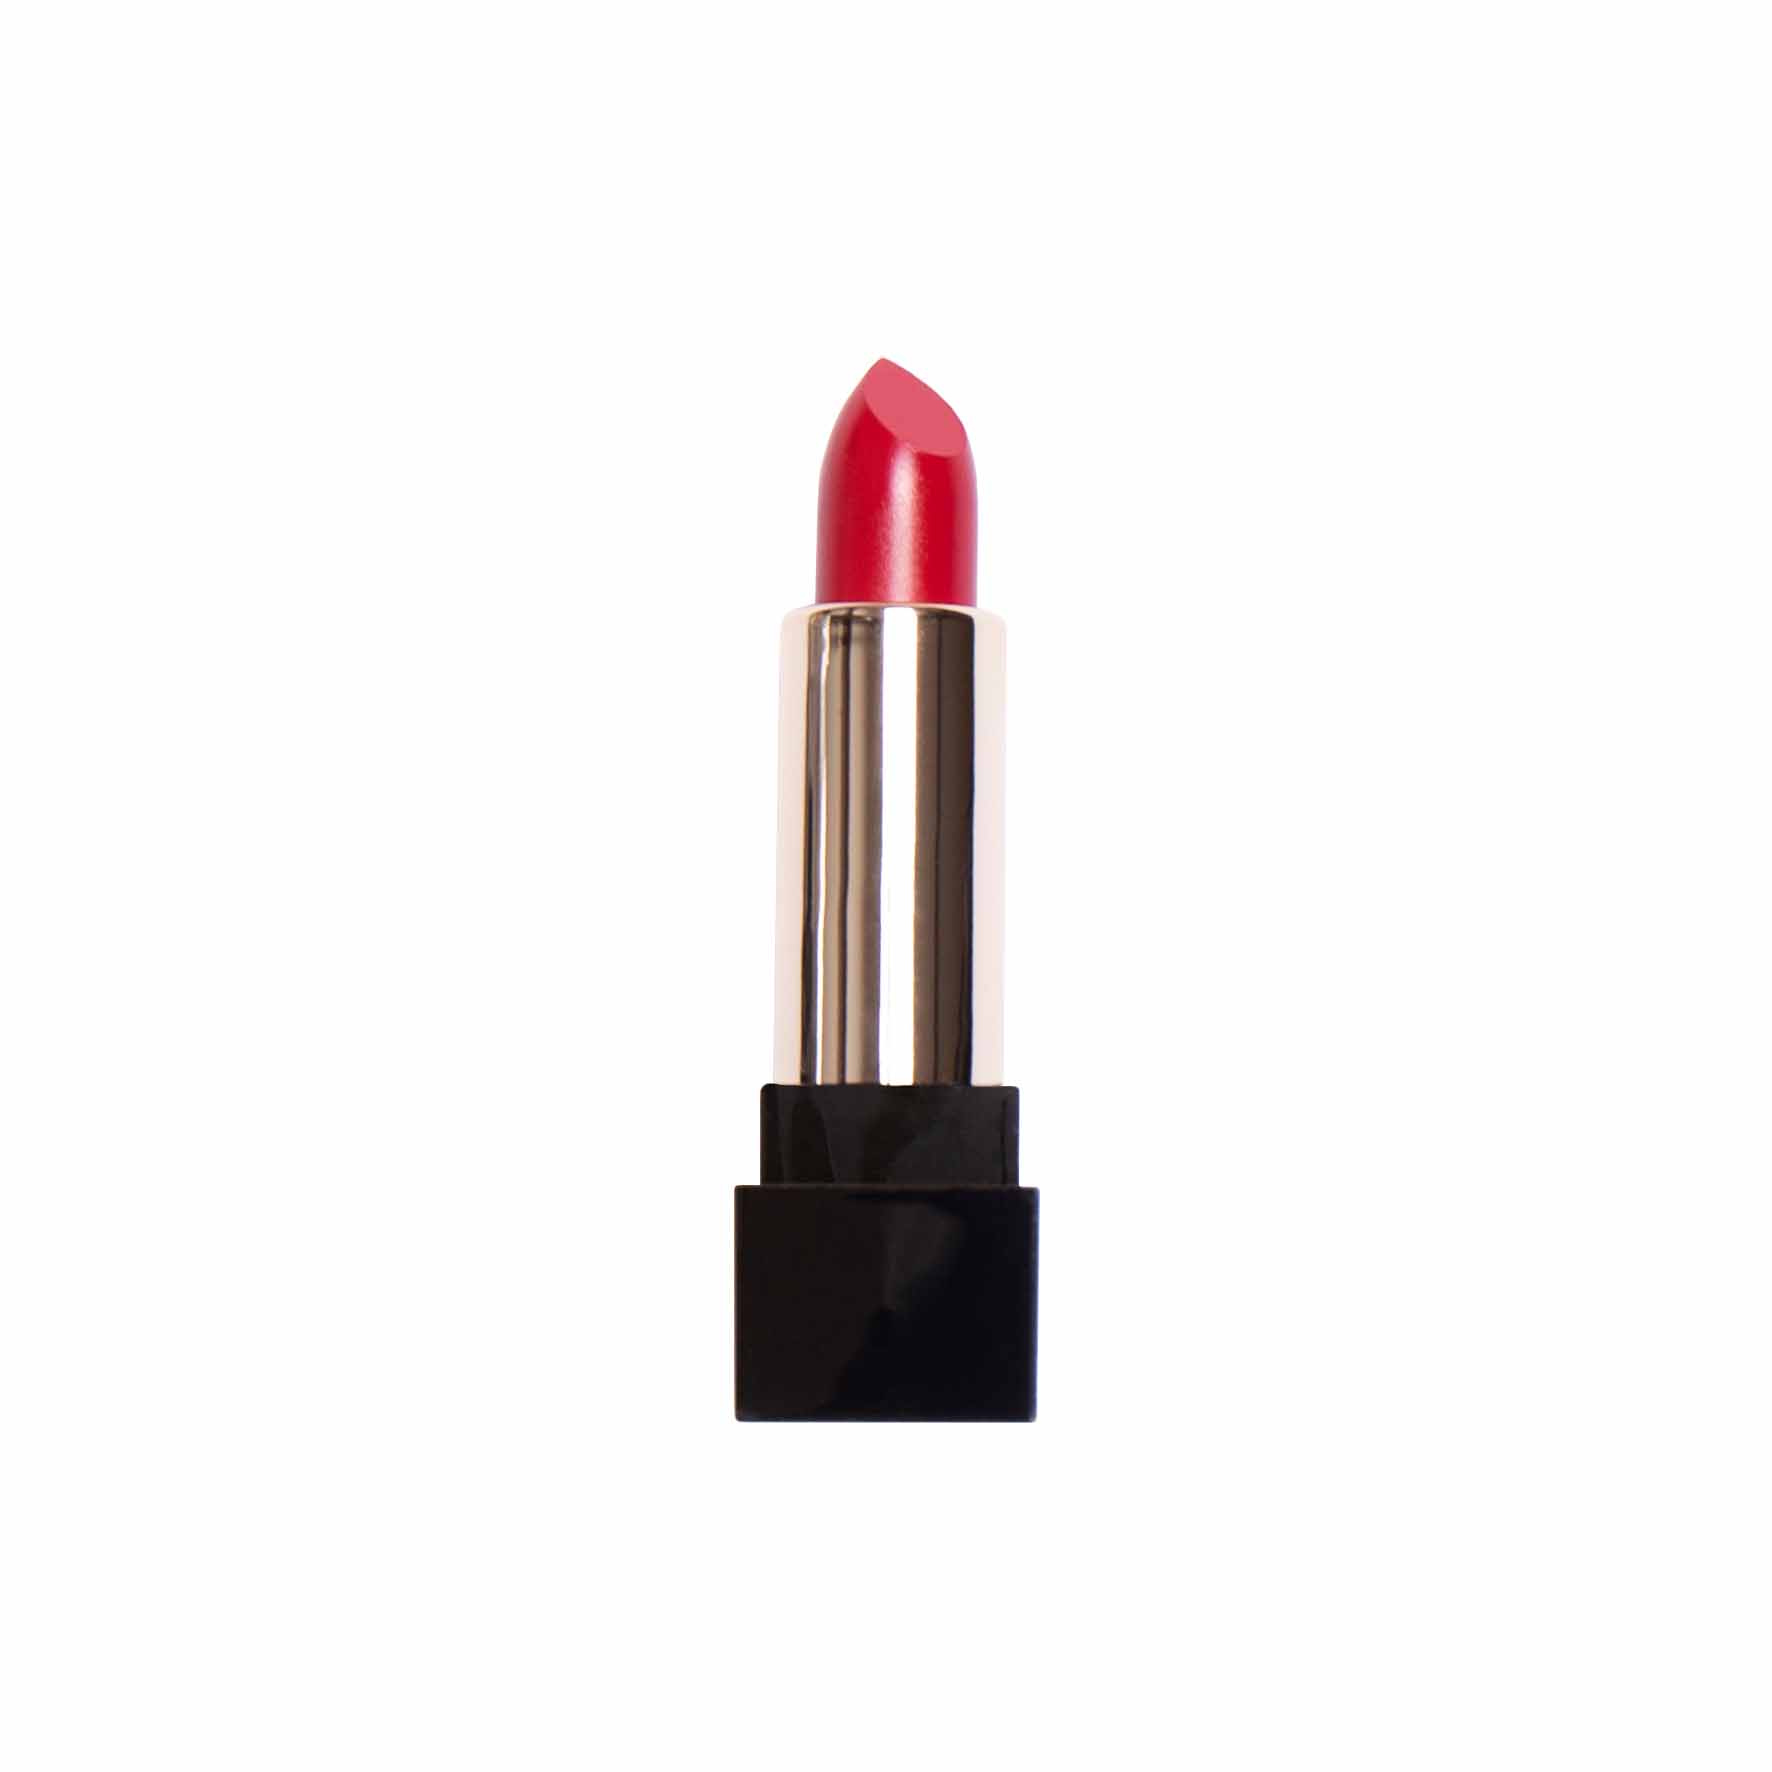 Lipstick 05 DEEP COOL RED Skin Color Cosmetics